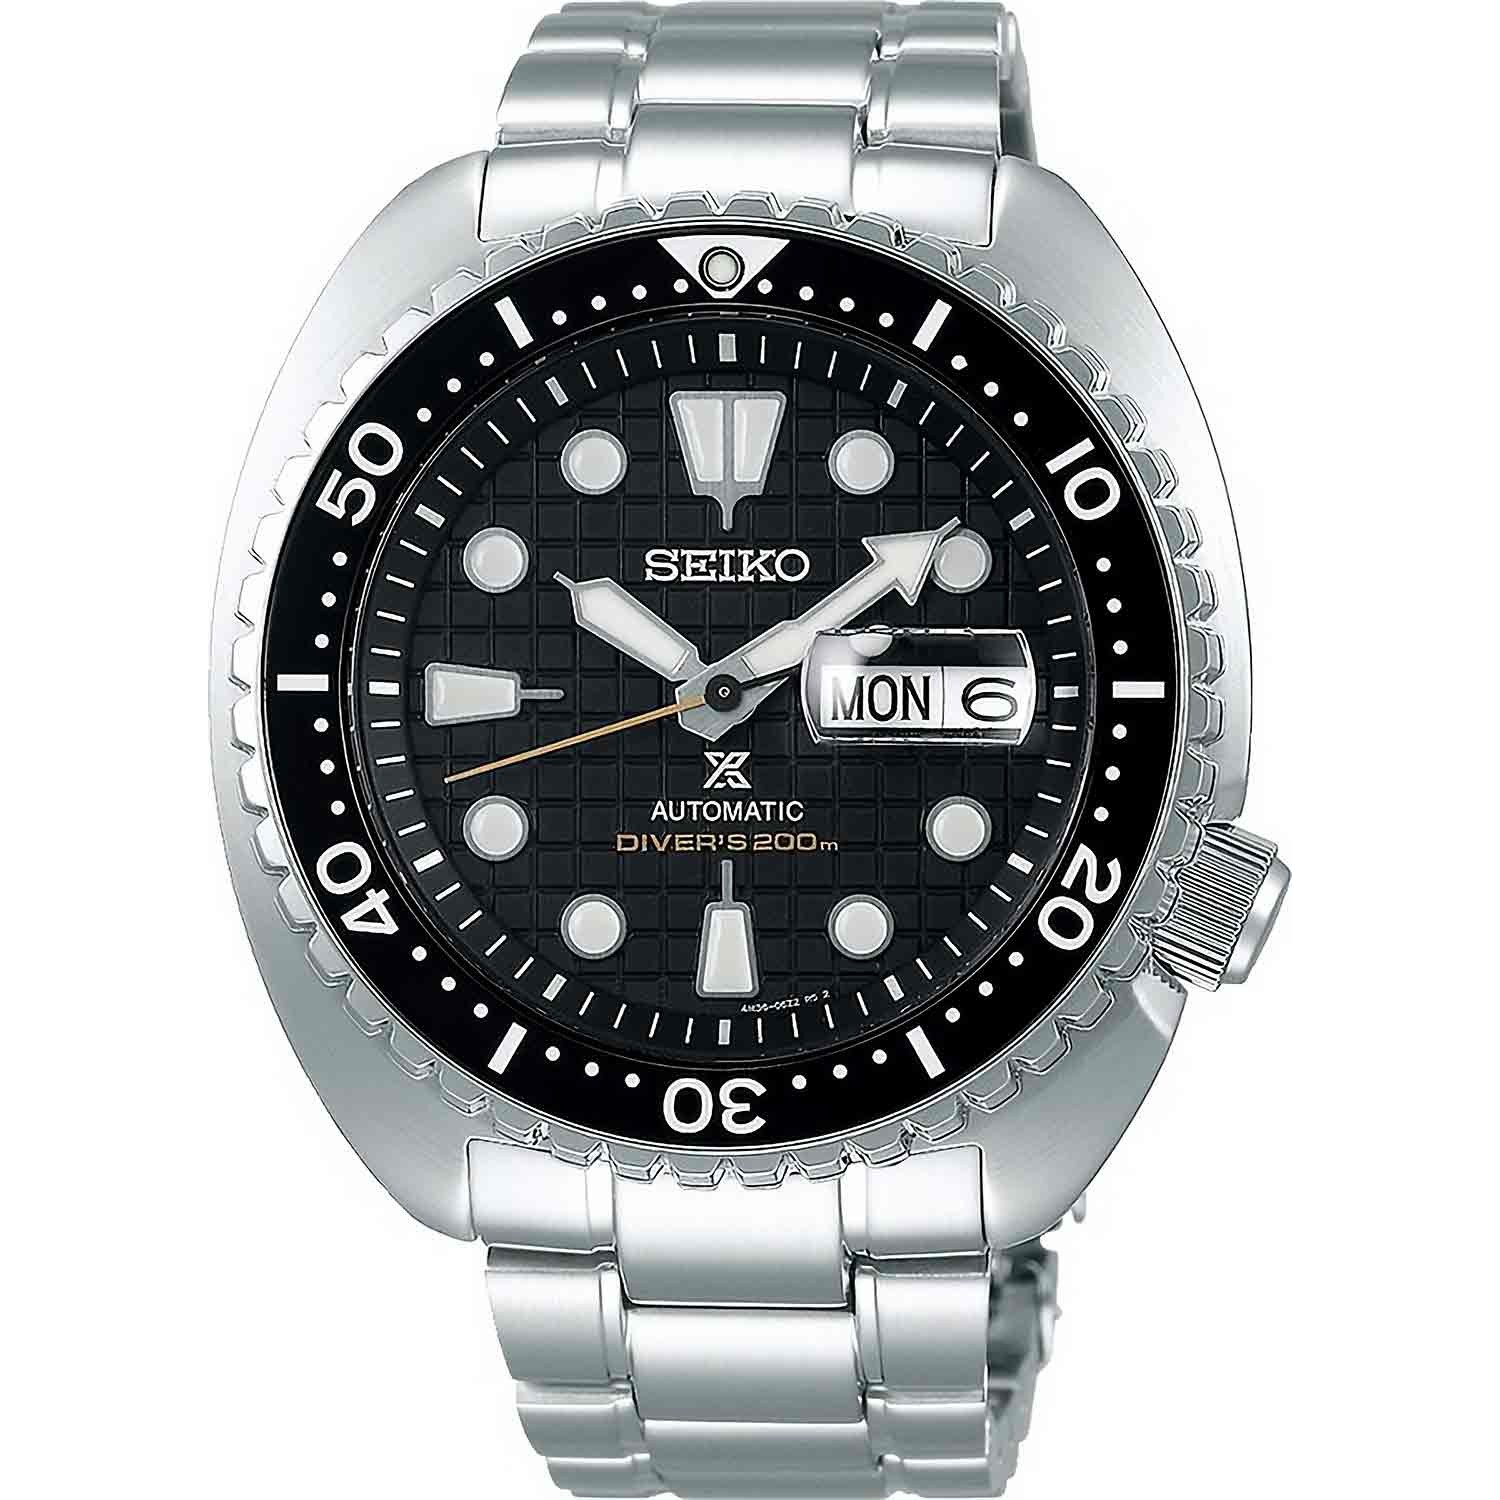 SRPE03K SEIKO Prospex King Turtle Special Edition. Seiko SRPE03K Automatic Prospex 200m Divers Watch Black King Turtle. This mens watch features a stainless steel case and bracelet, with a screw lock crown and a screw case back. The Seiko SRPE03K1 feature